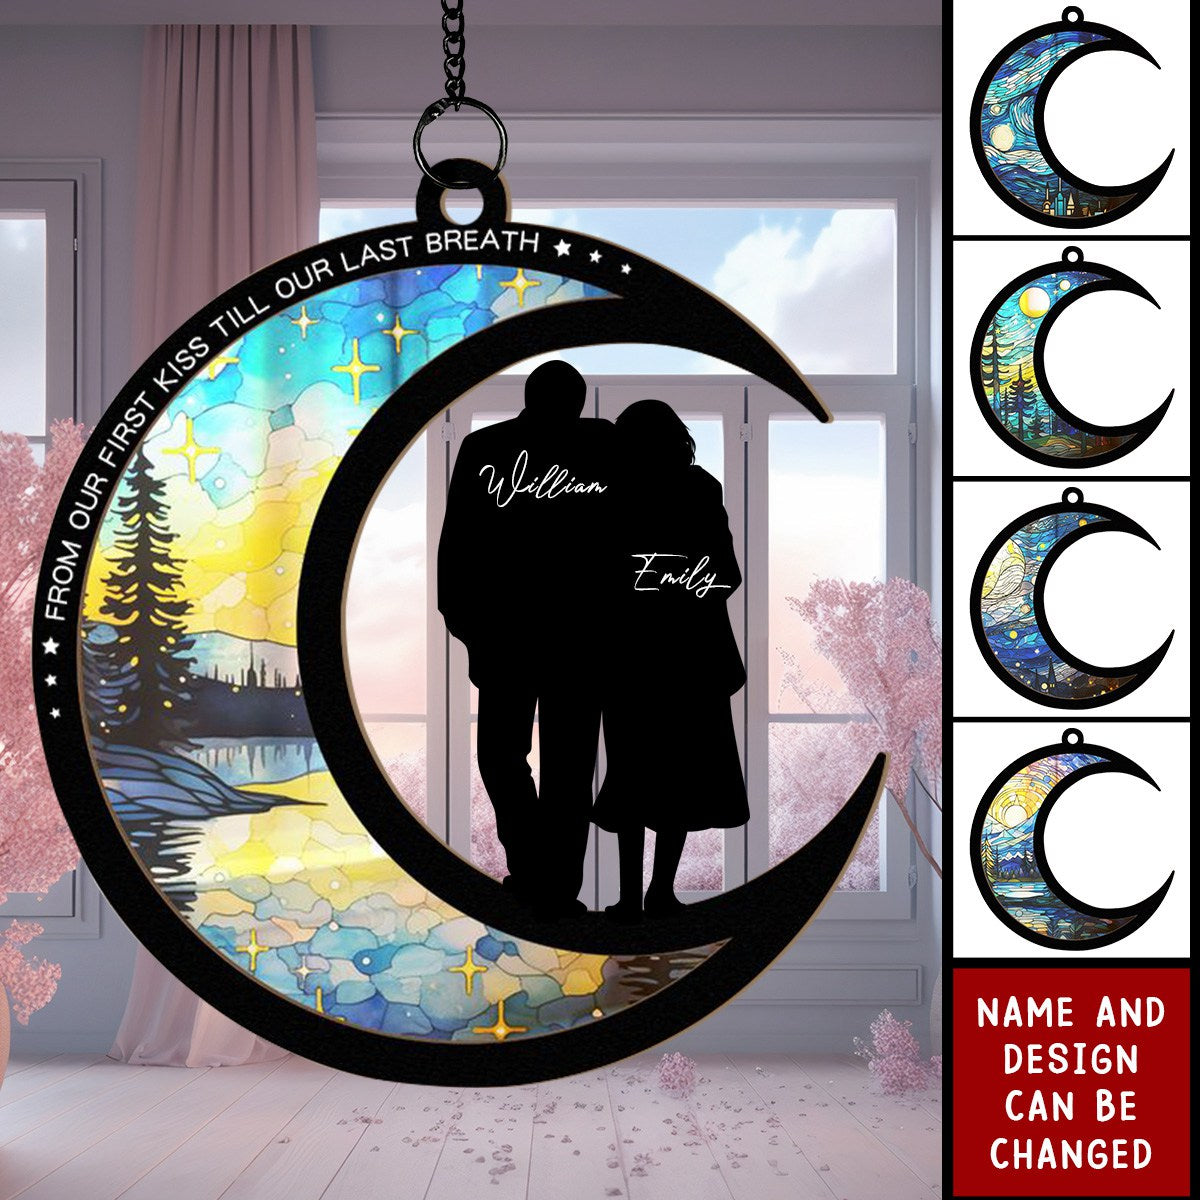 From Our First Breath Till Our Last Breath - Personalized Window Hanging Suncatcher Ornament